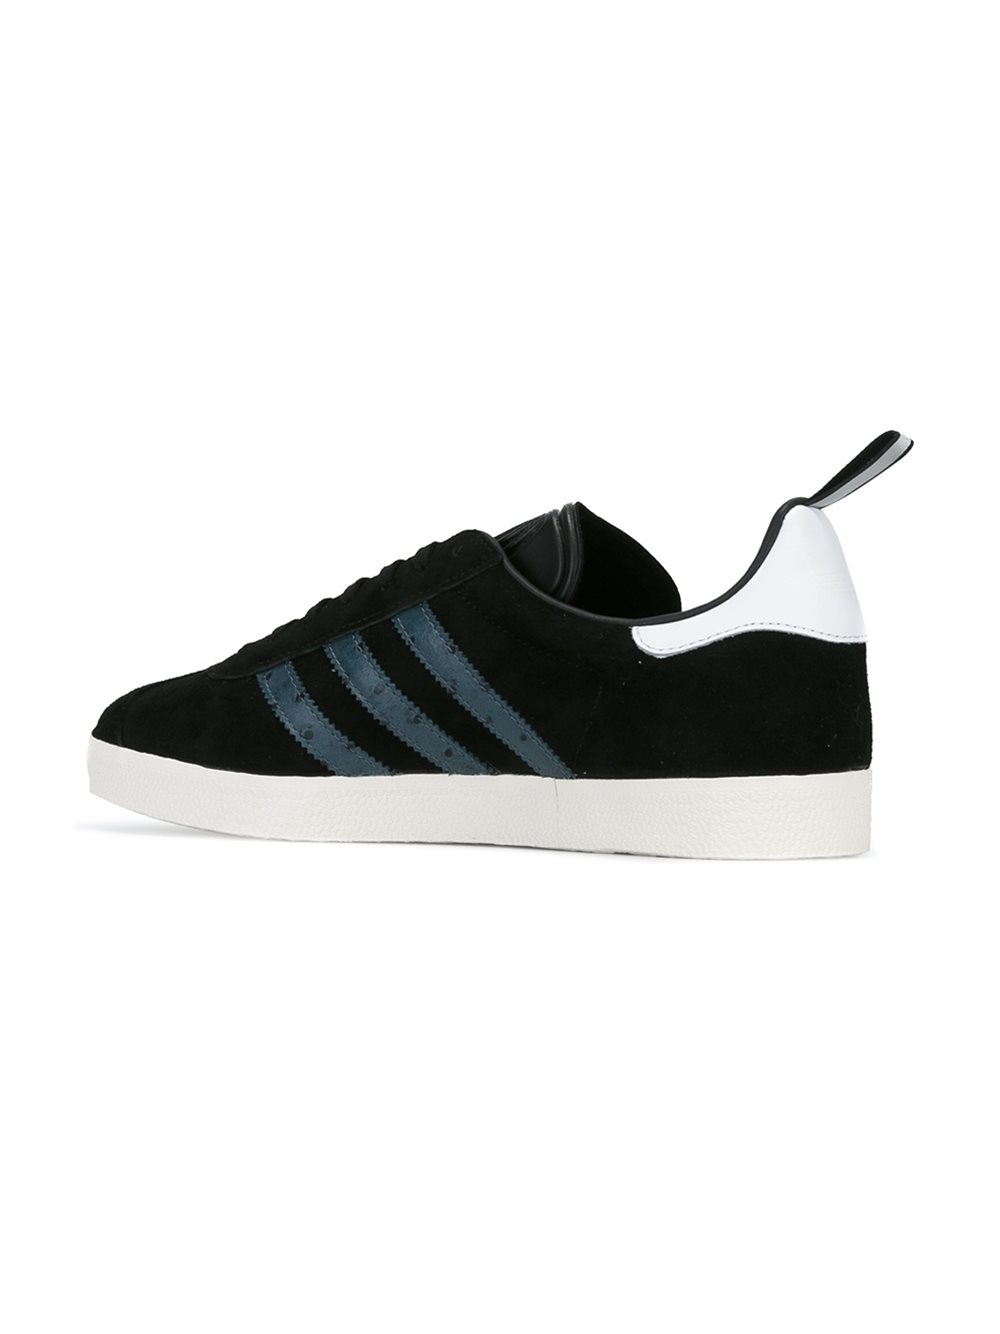 adidas Originals Leather 'gazelle' Special Edition Sneakers in Black ...